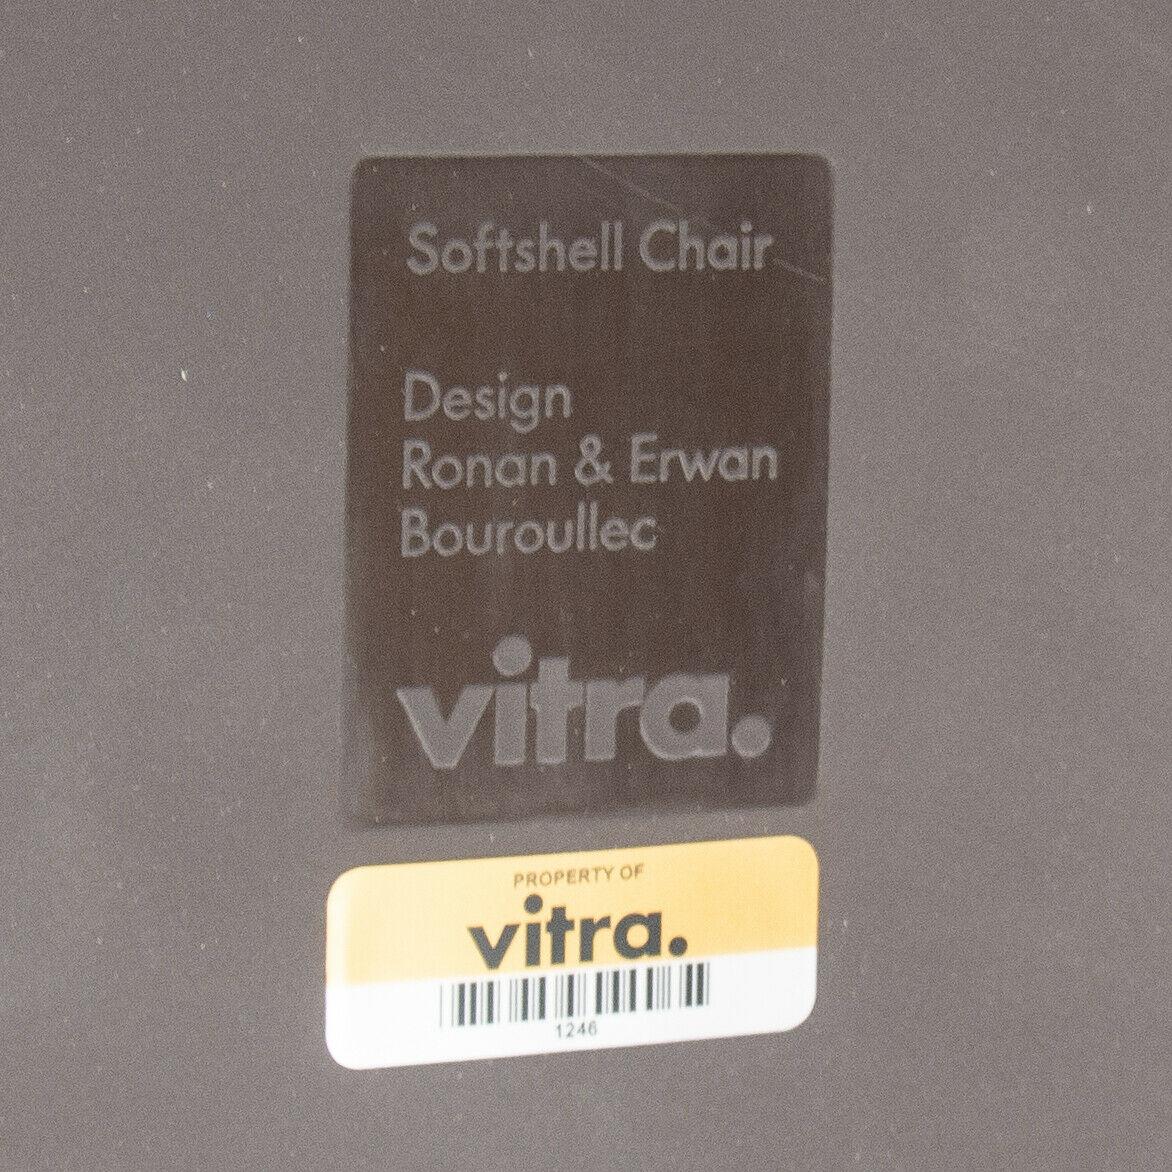 2019 Vitra Softshell Side Chair w Dark Brown Leather by Ronan & Erwan Bouroullec For Sale 5